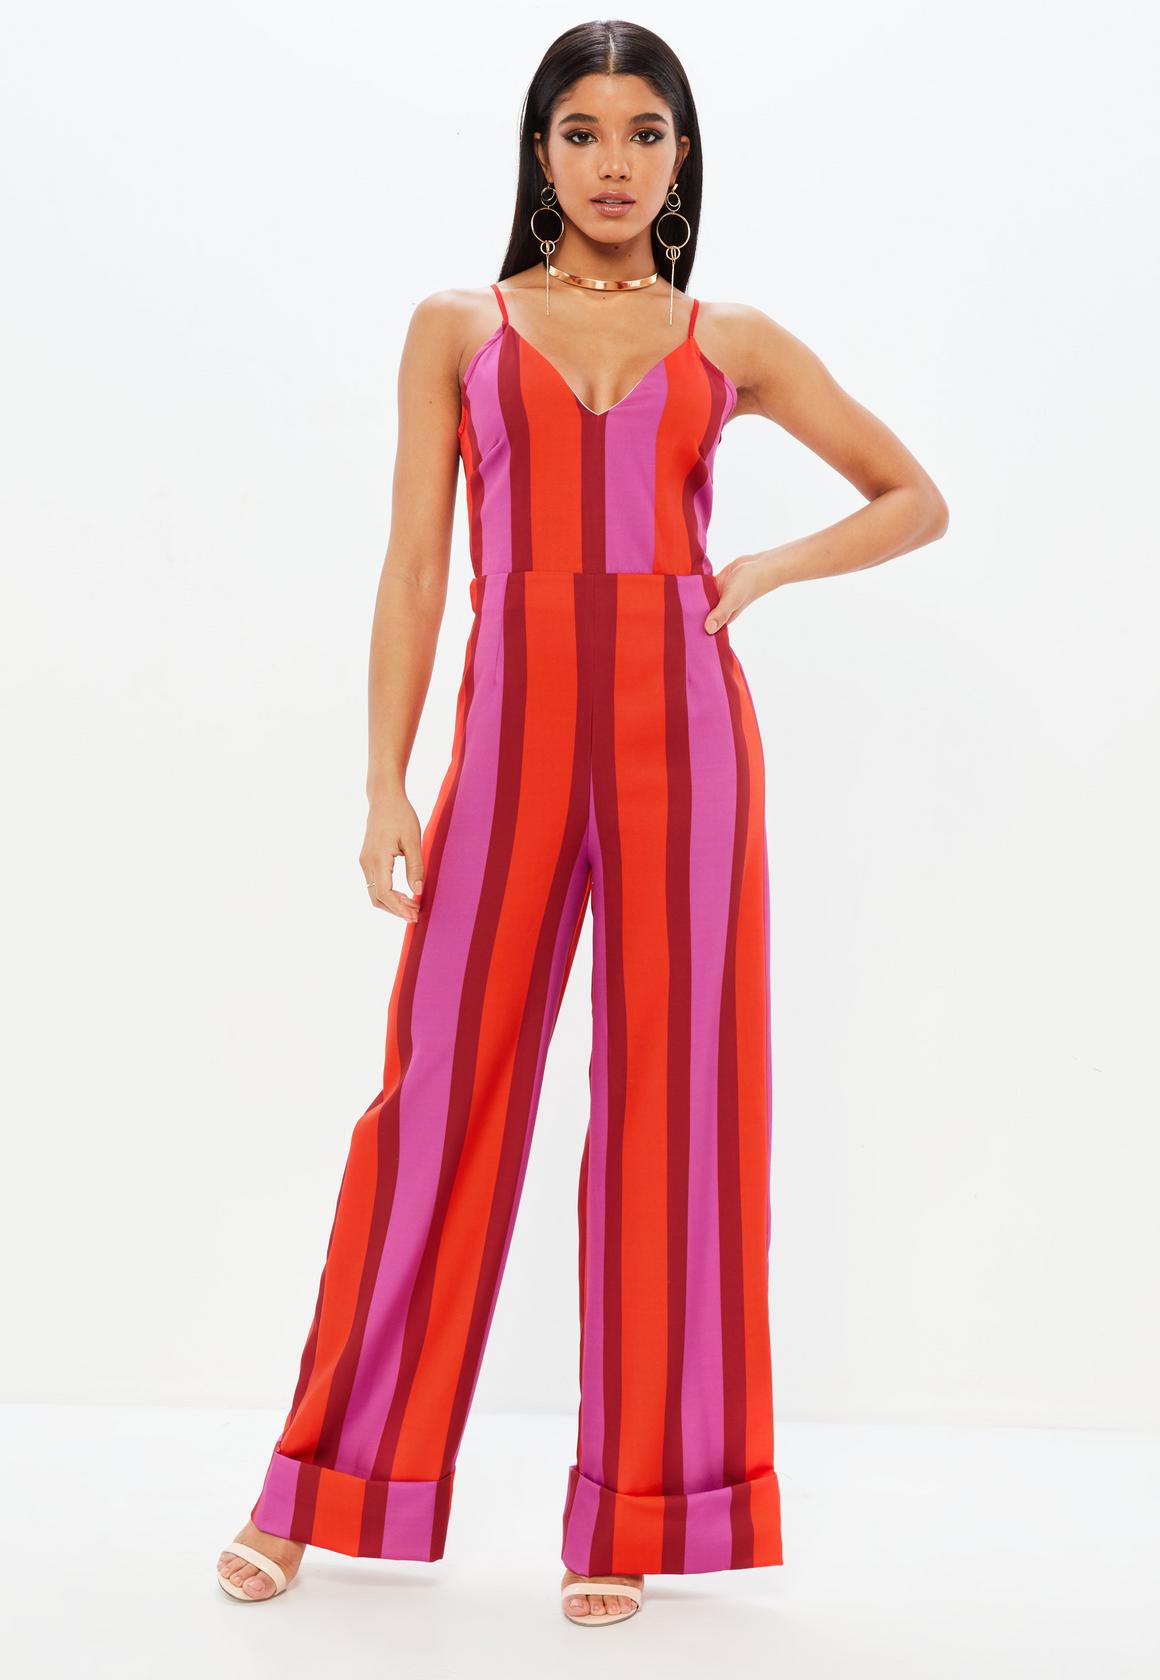 Cherry red jumpsuits | HOWTOWEAR Fashion